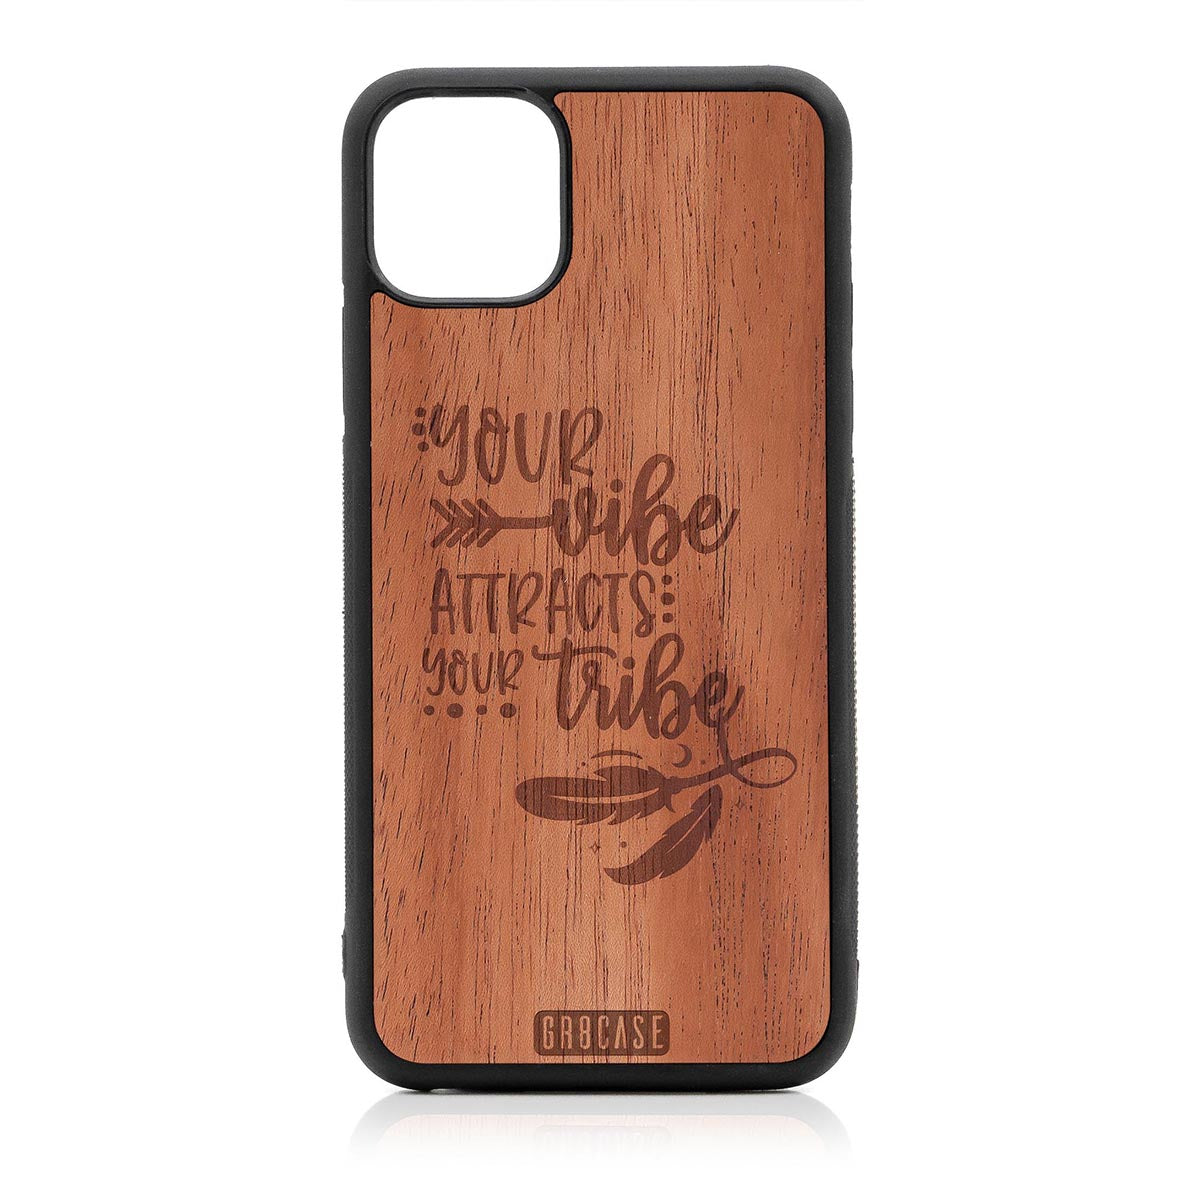 Your Vibe Attracts Your Tribe Design Wood Case For iPhone 11 Pro Max